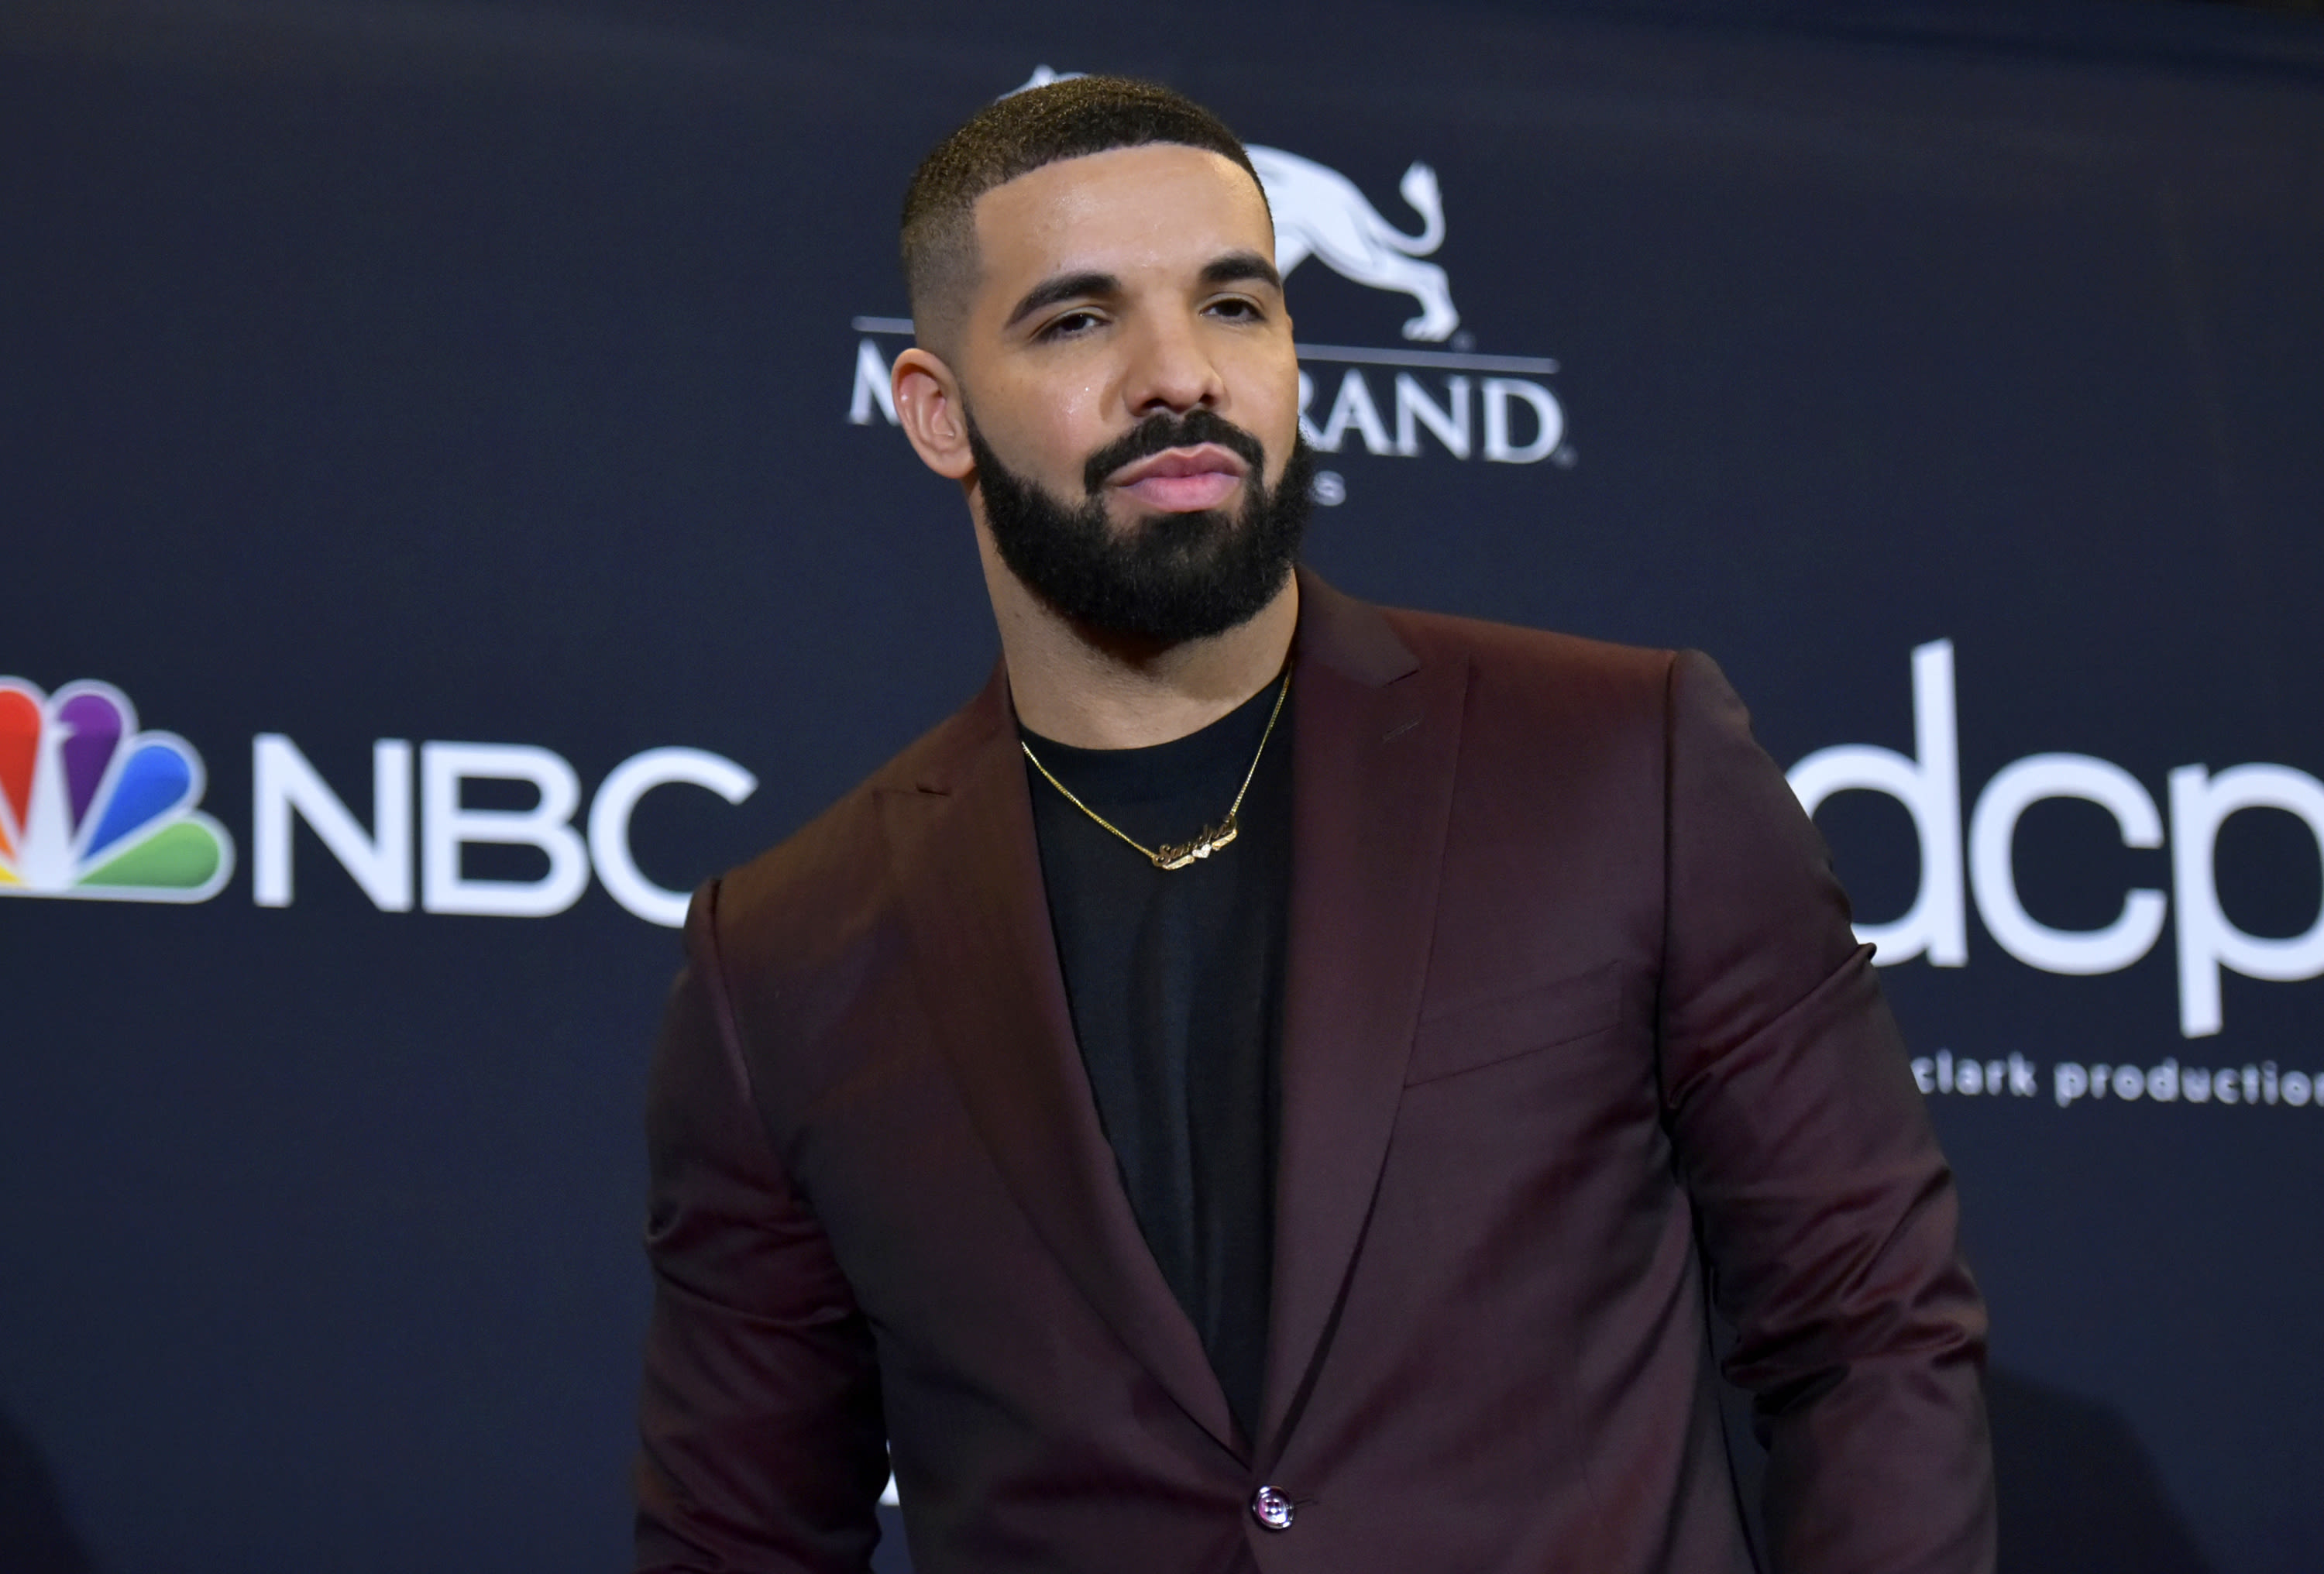 Suspect reportedly arrested after attempted break-in at Drake's Toronto mansion